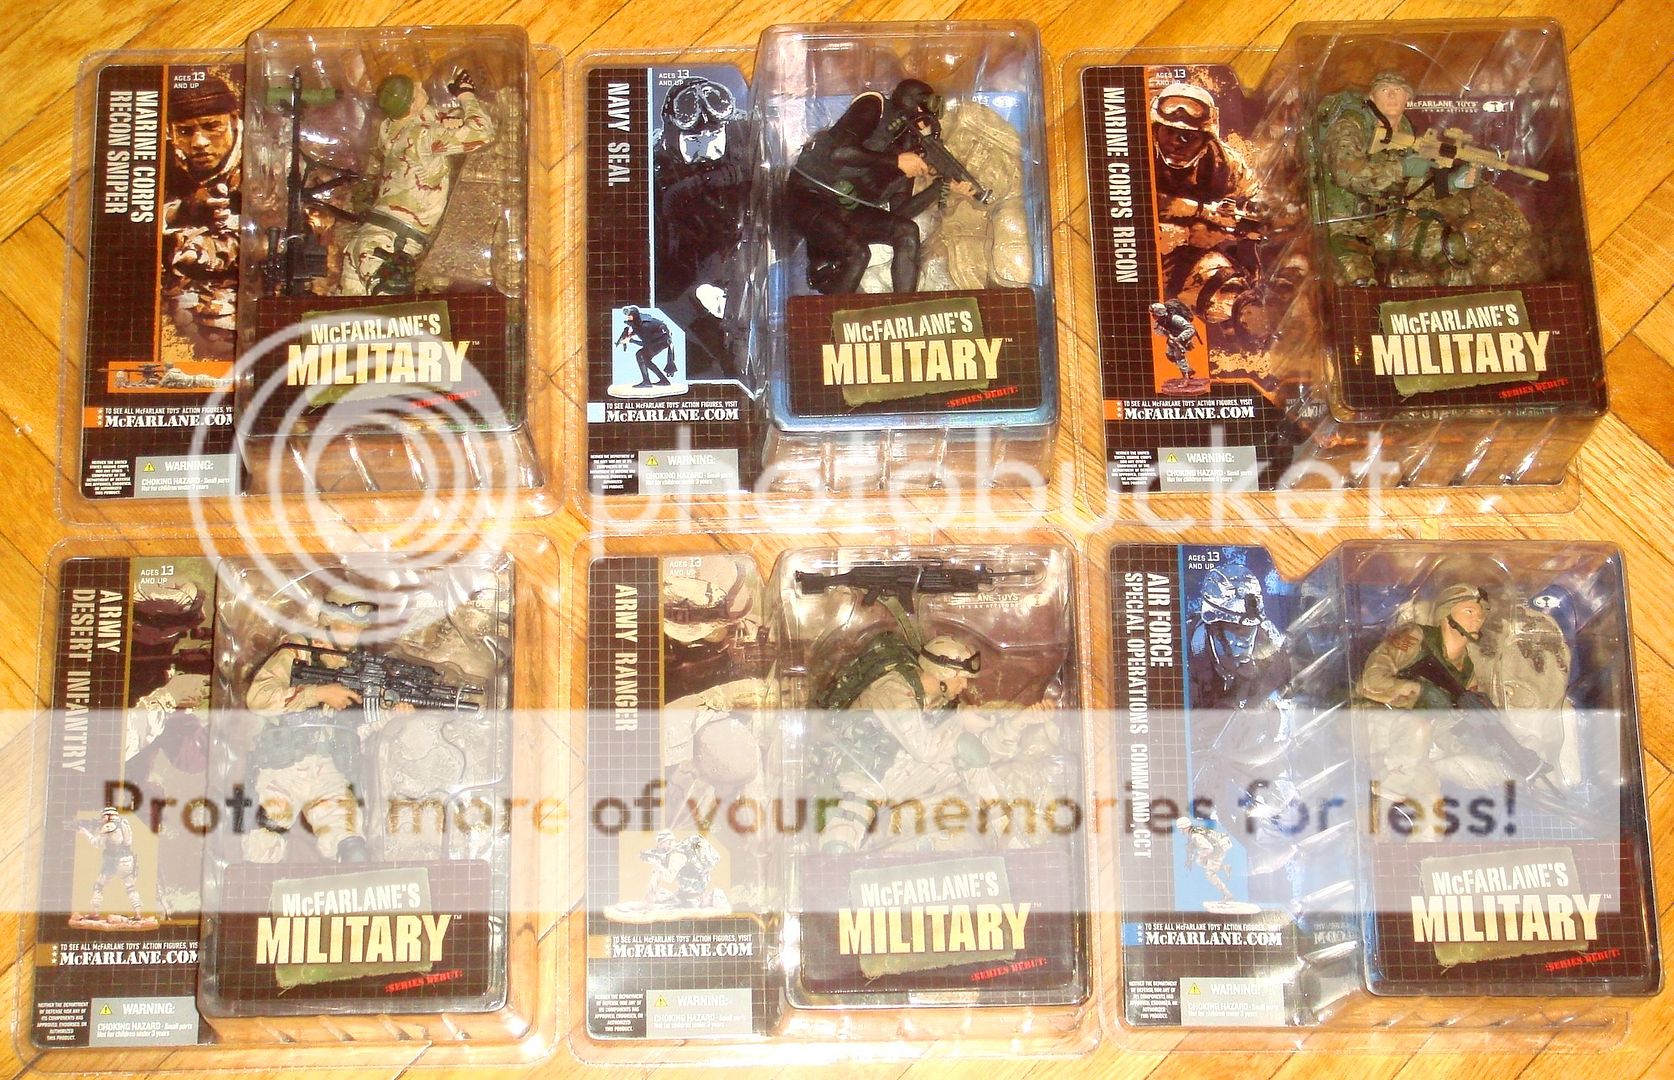   MILITARY COLLECTION SERIES 50 MIB SNIPER ARMY SPECIAL FORCES AIR FORCE